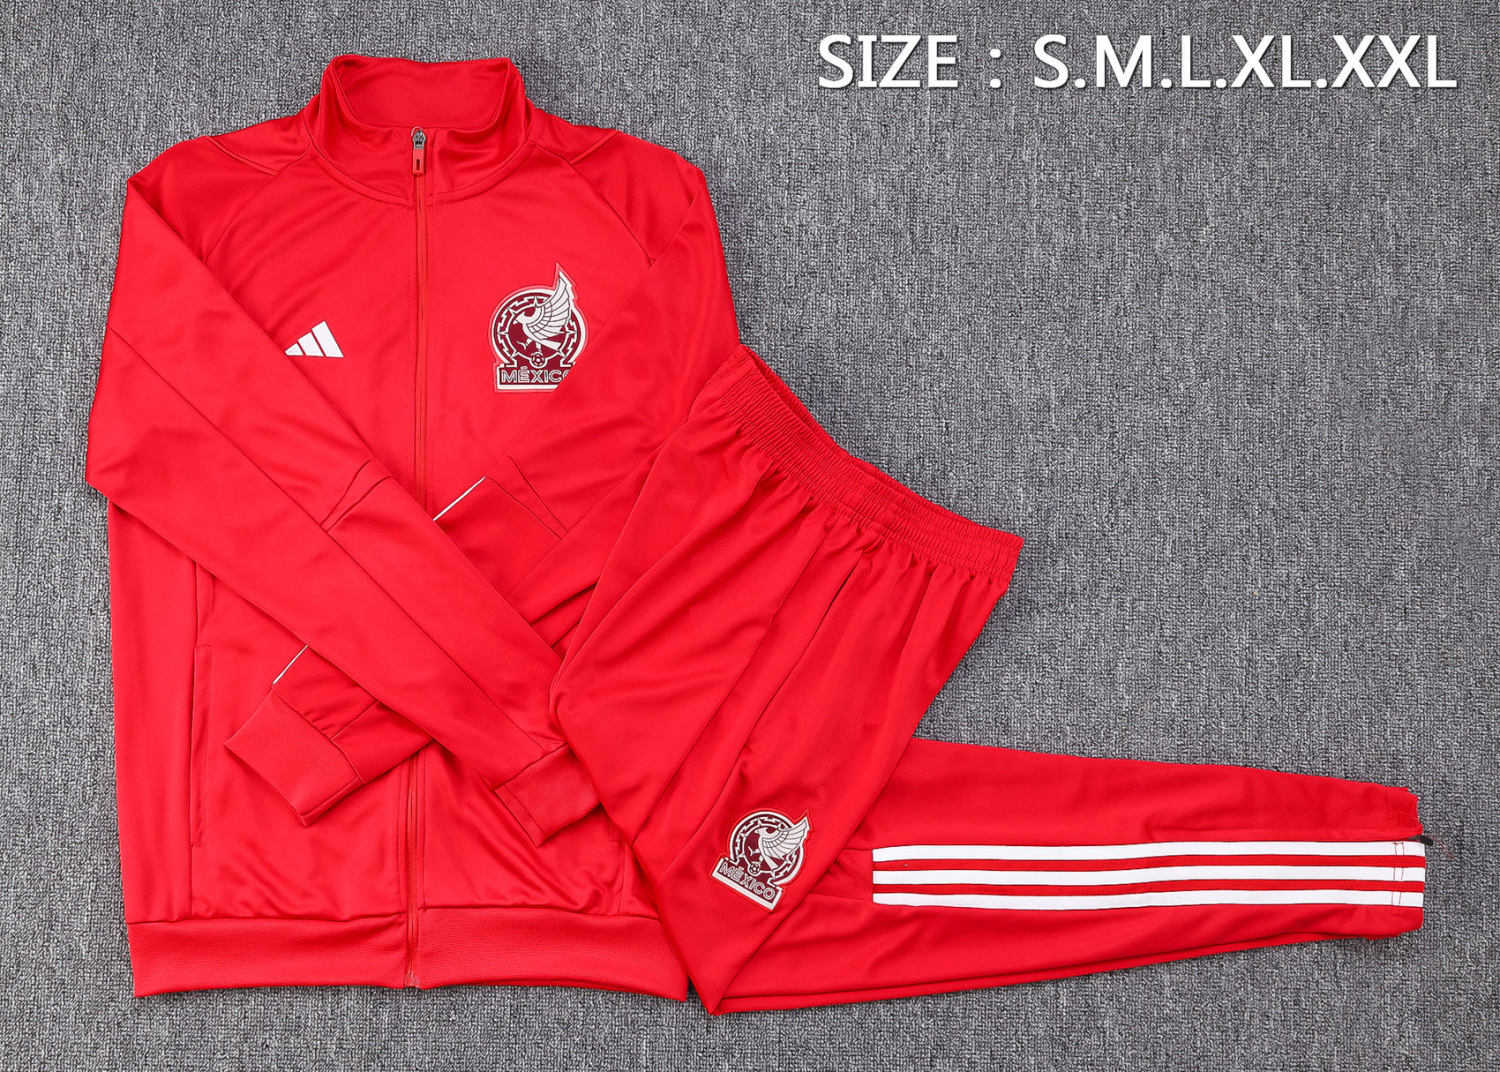 Mexico Soccer Jacket + Pants Replica Red 2023 Mens